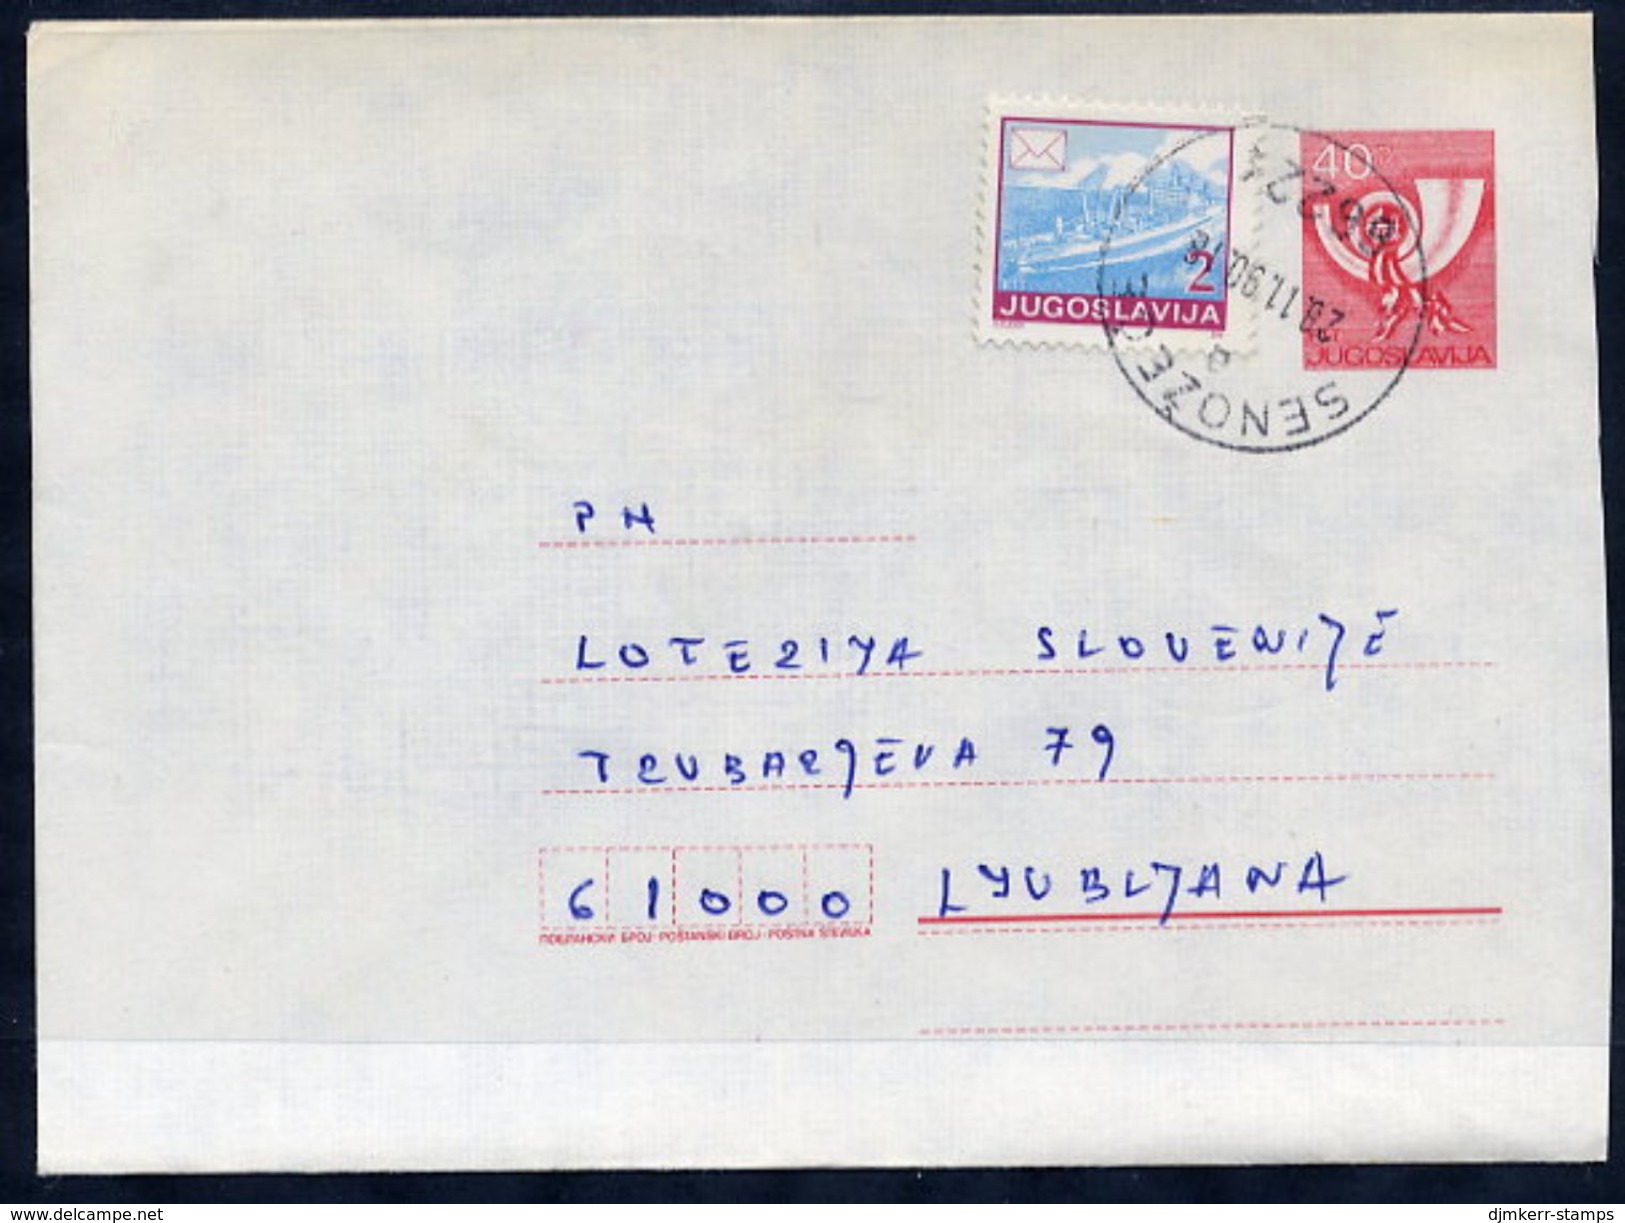 YUGOSLAVIA 1986 Posthorn 40 D.stationery Envelope Format A  Used With Additional Franking.  Michel U76A - Entiers Postaux